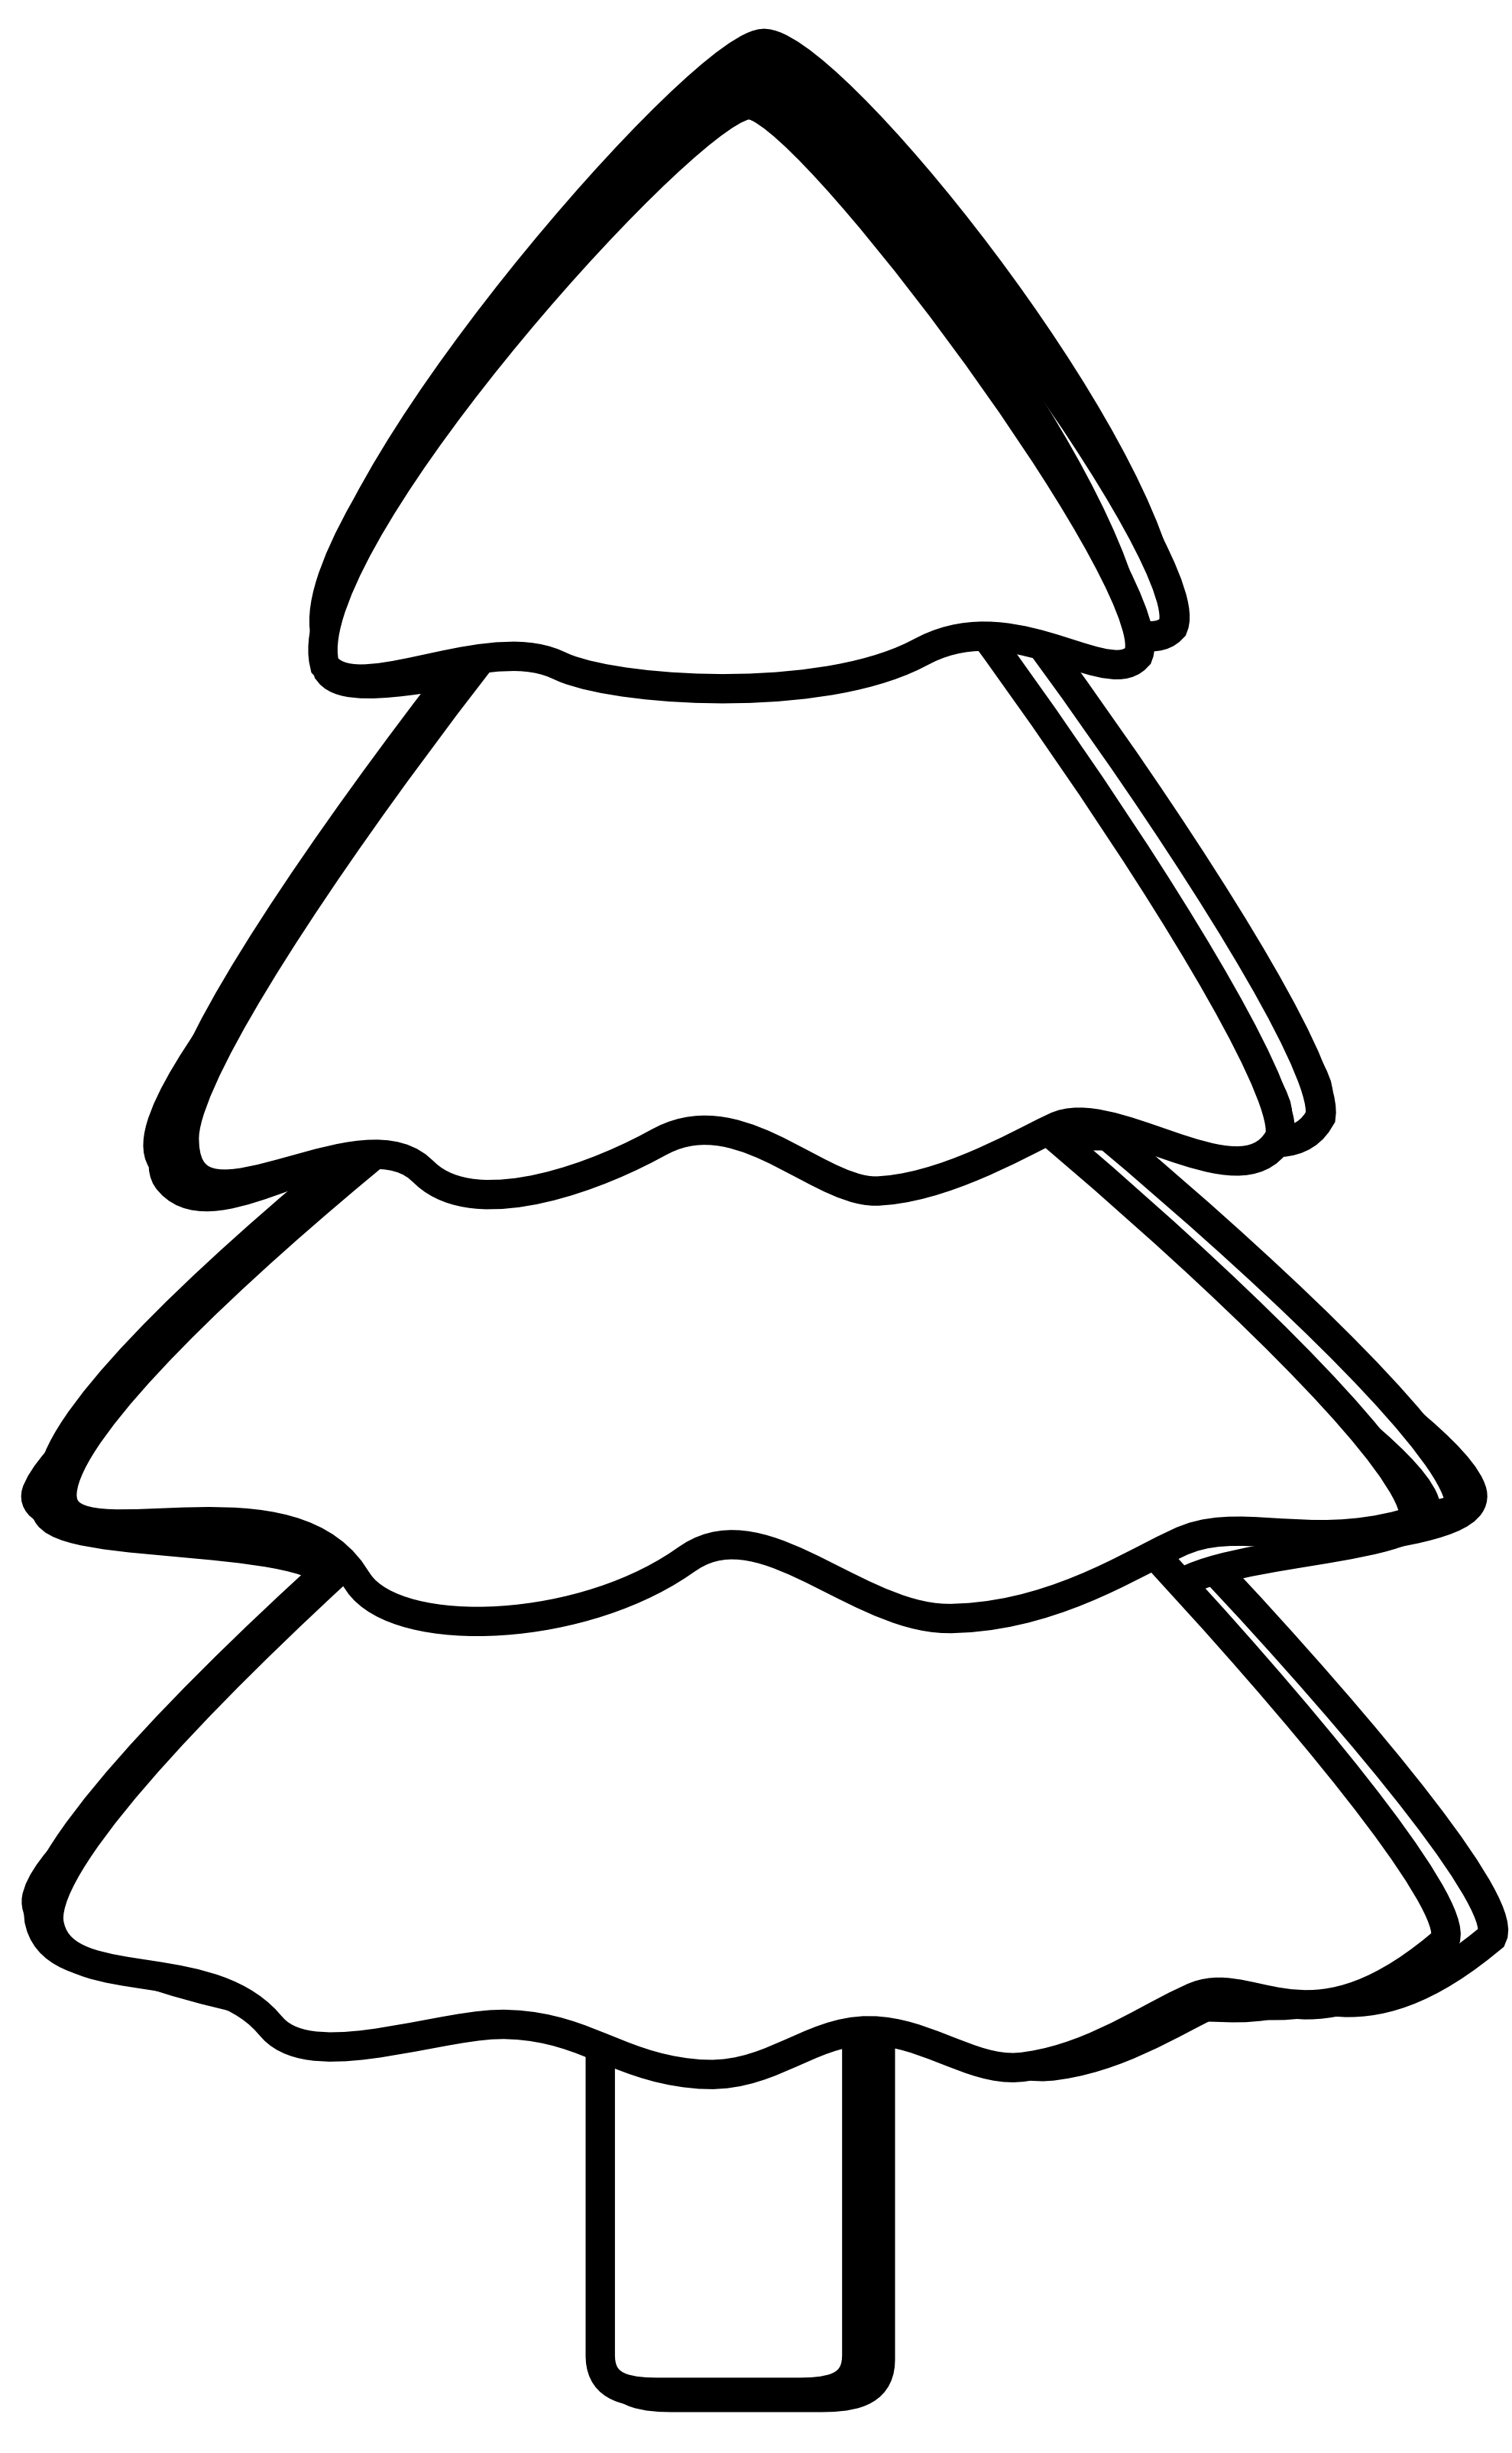 Spruce tree clipart black and white